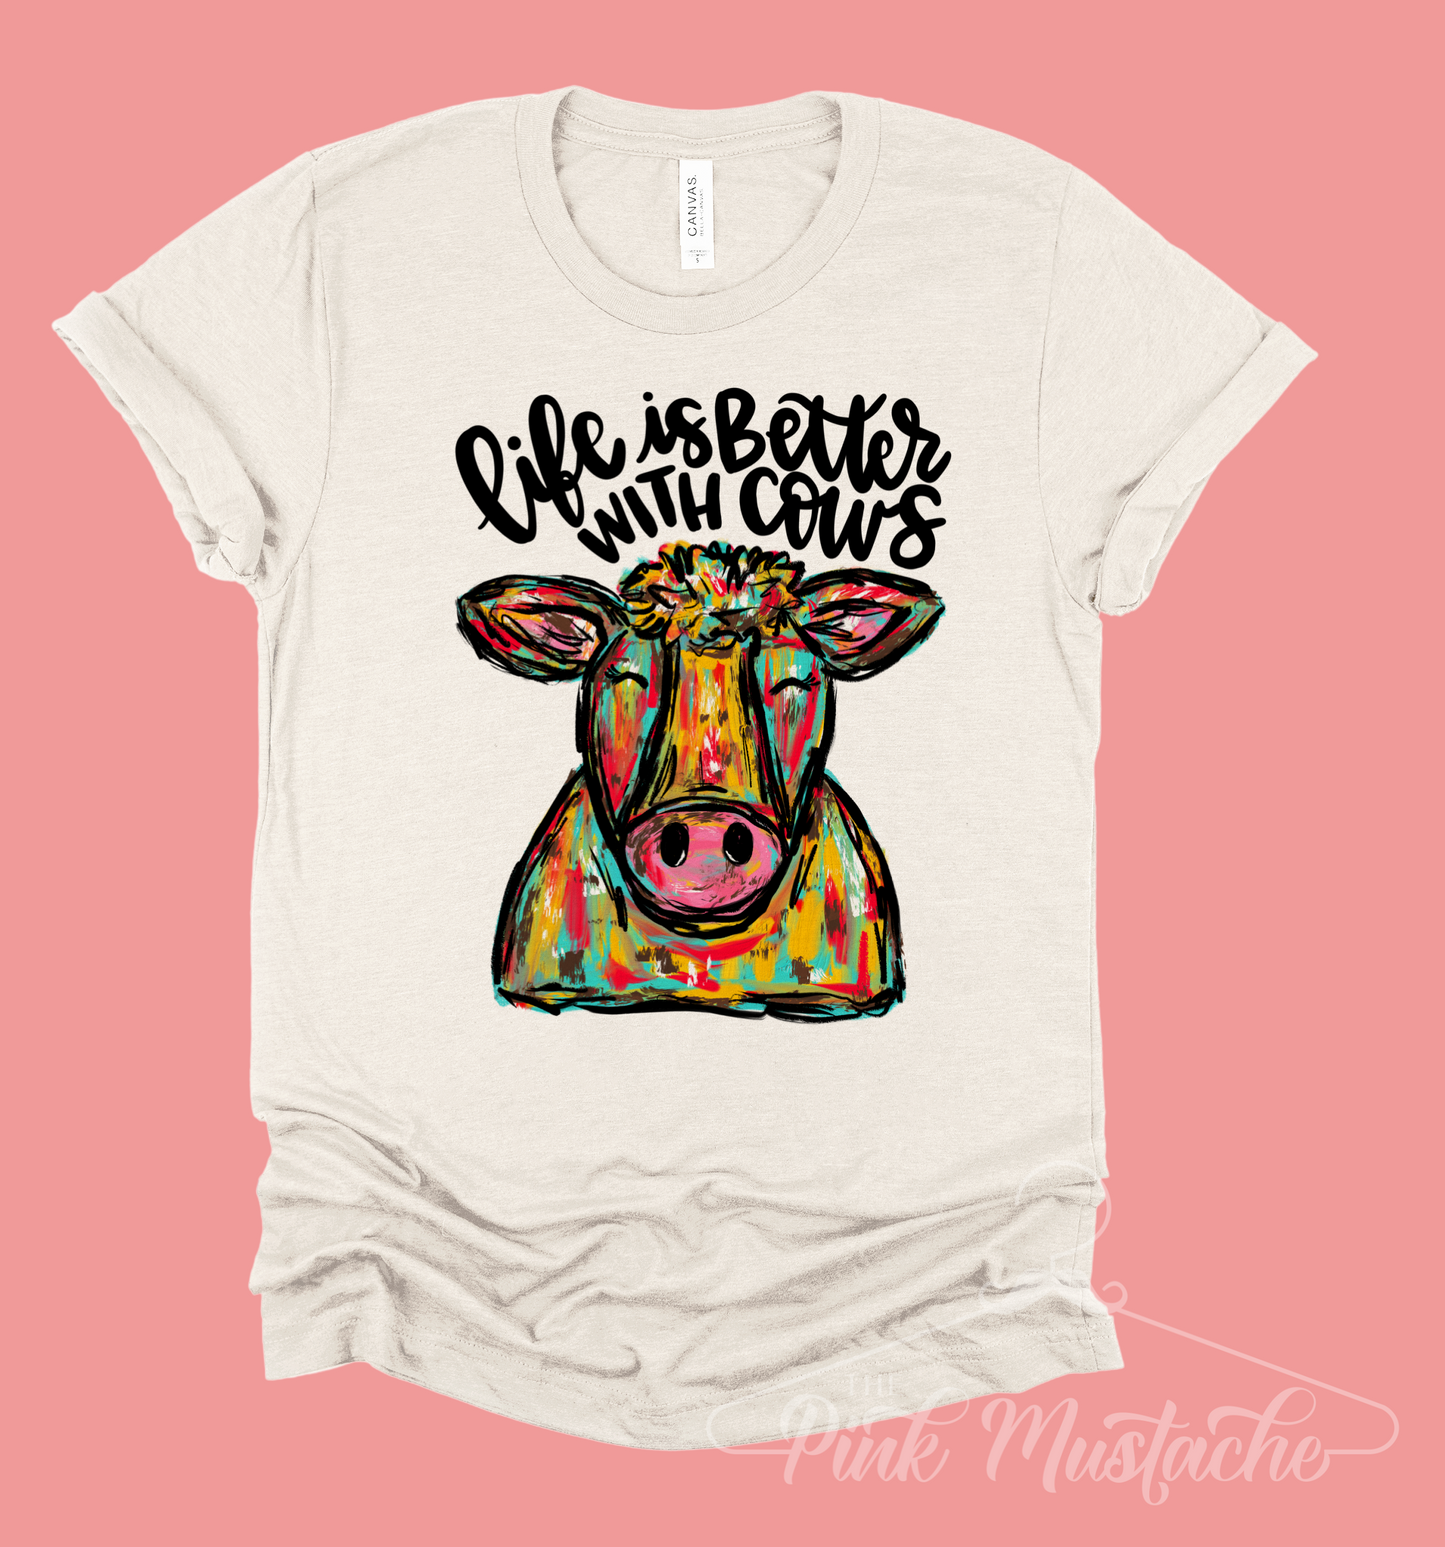 Life Is Better With Cows Tee /Youth and Adult Sizes Available/ Country Western Unisex Softstyle T-Shirt